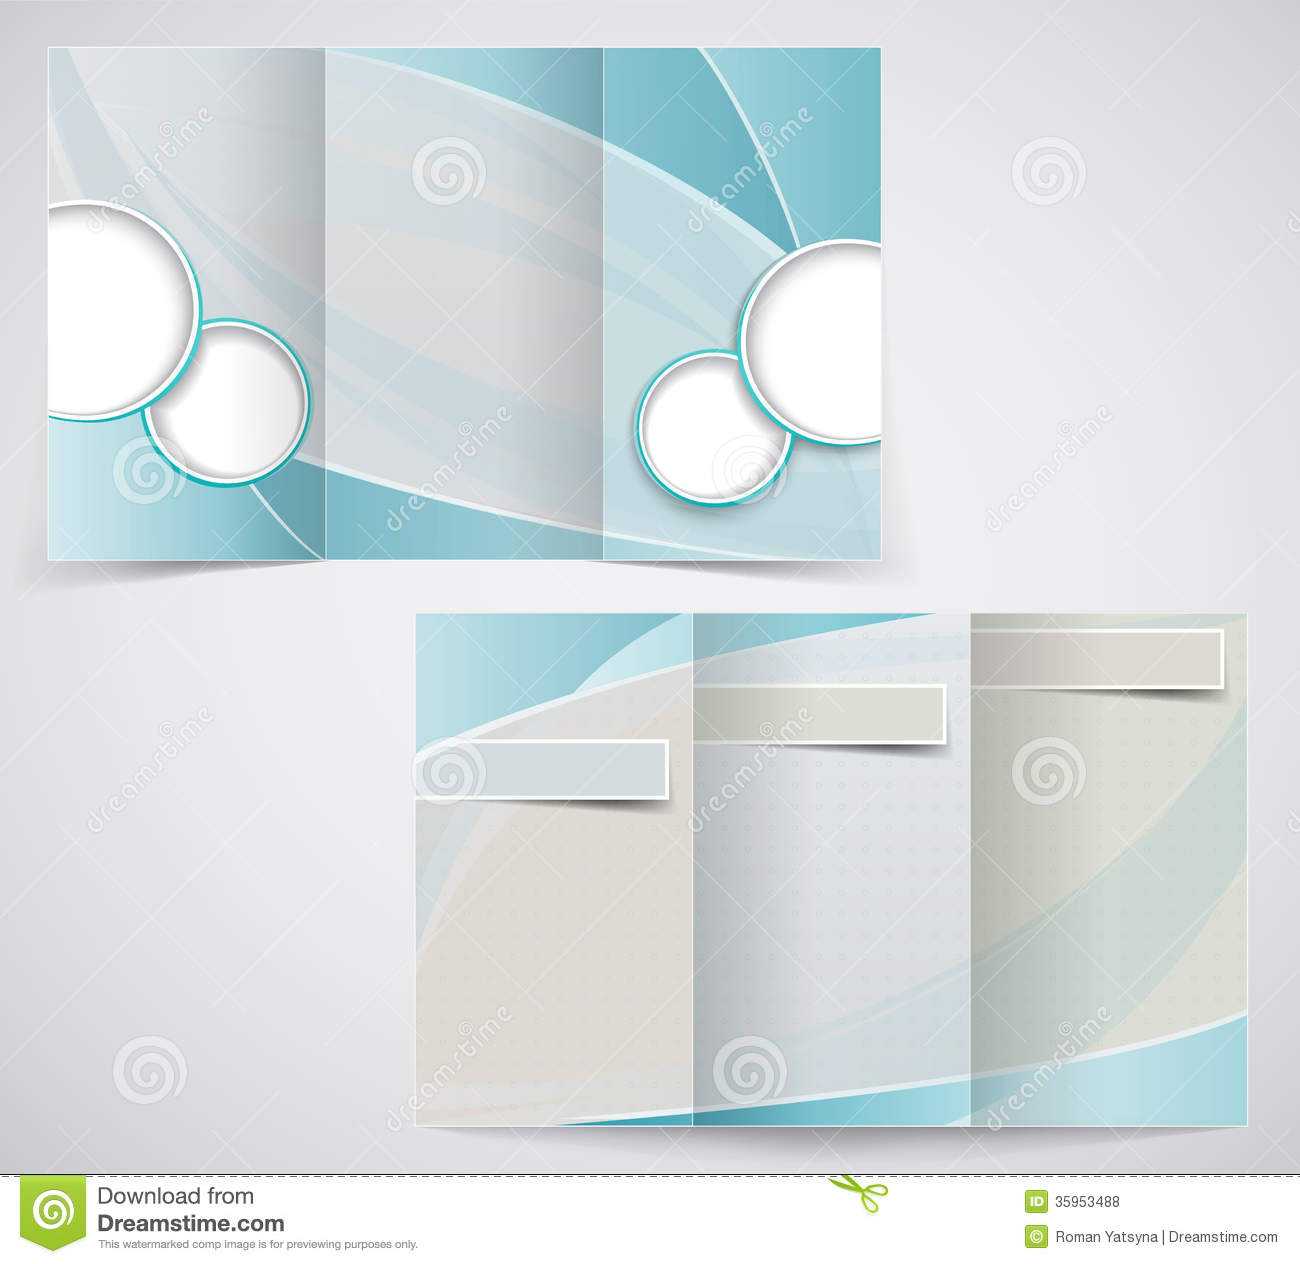 Tri Fold Business Brochure Template, Vector Blue D Stock Throughout Free Illustrator Brochure Templates Download